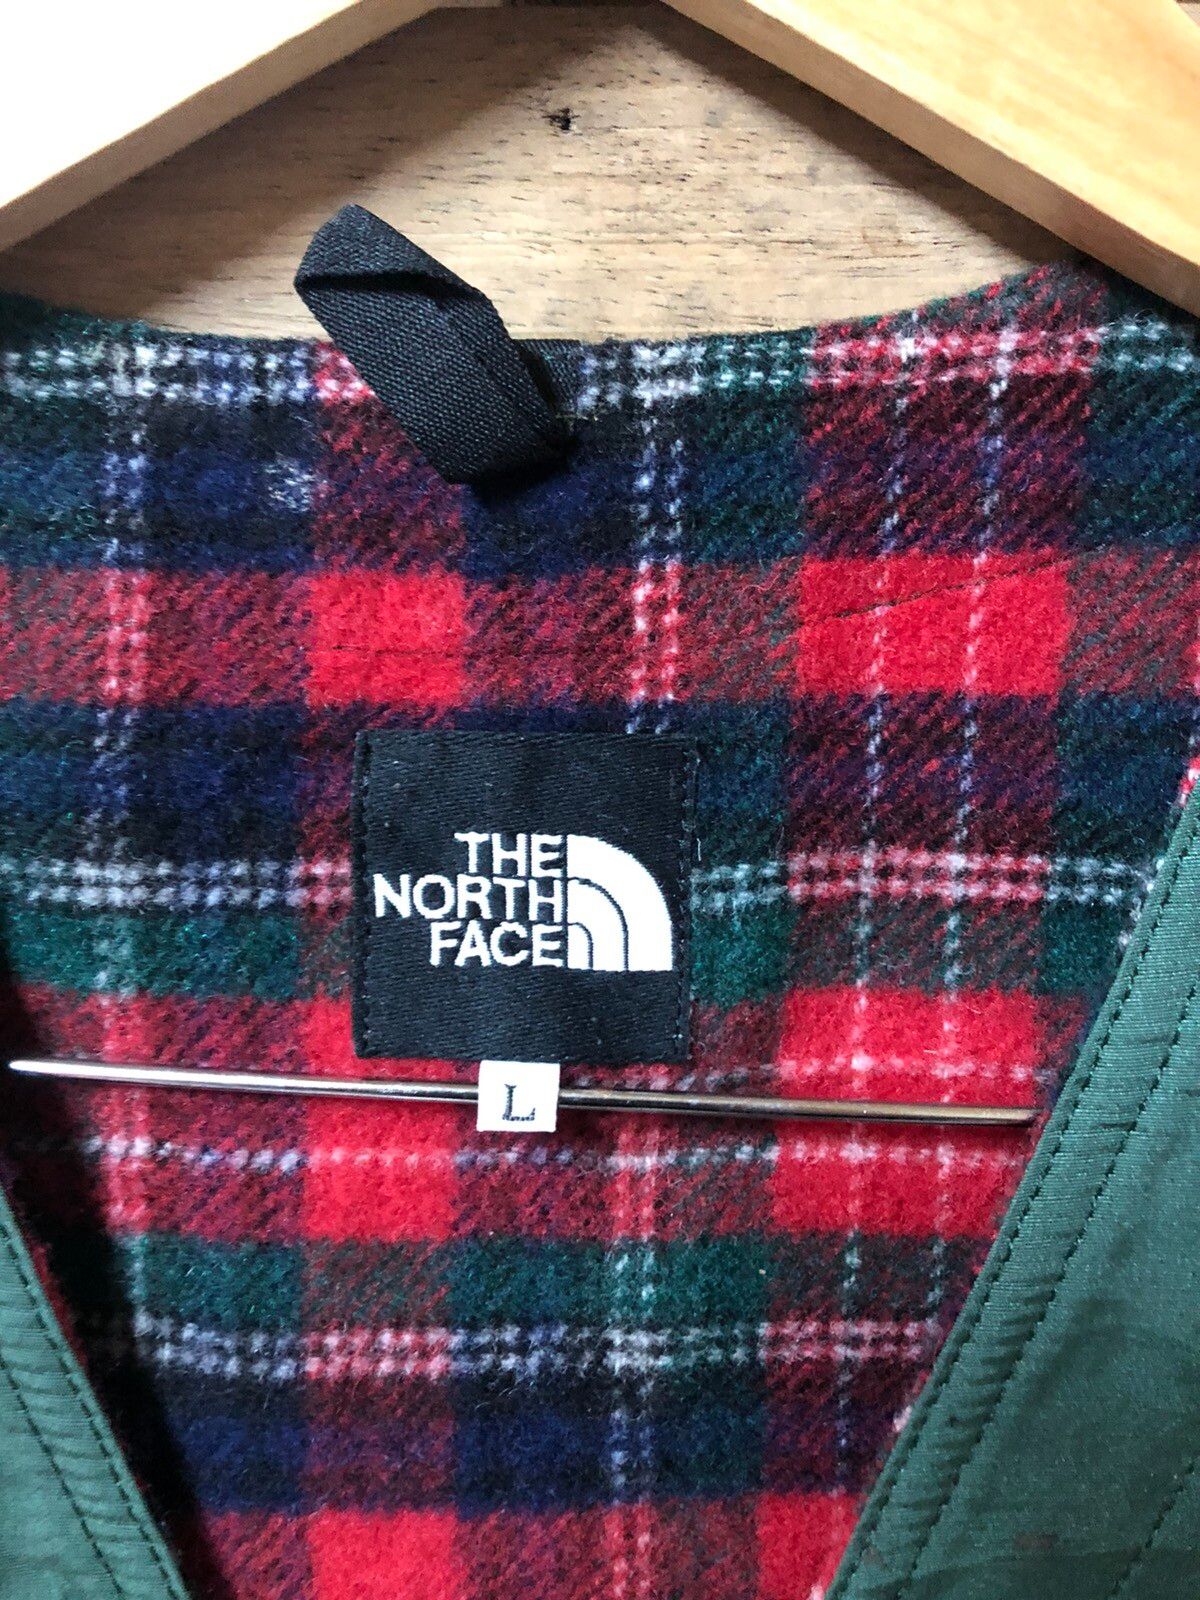 The North Face Vest Jacket Lined Pattern - 8